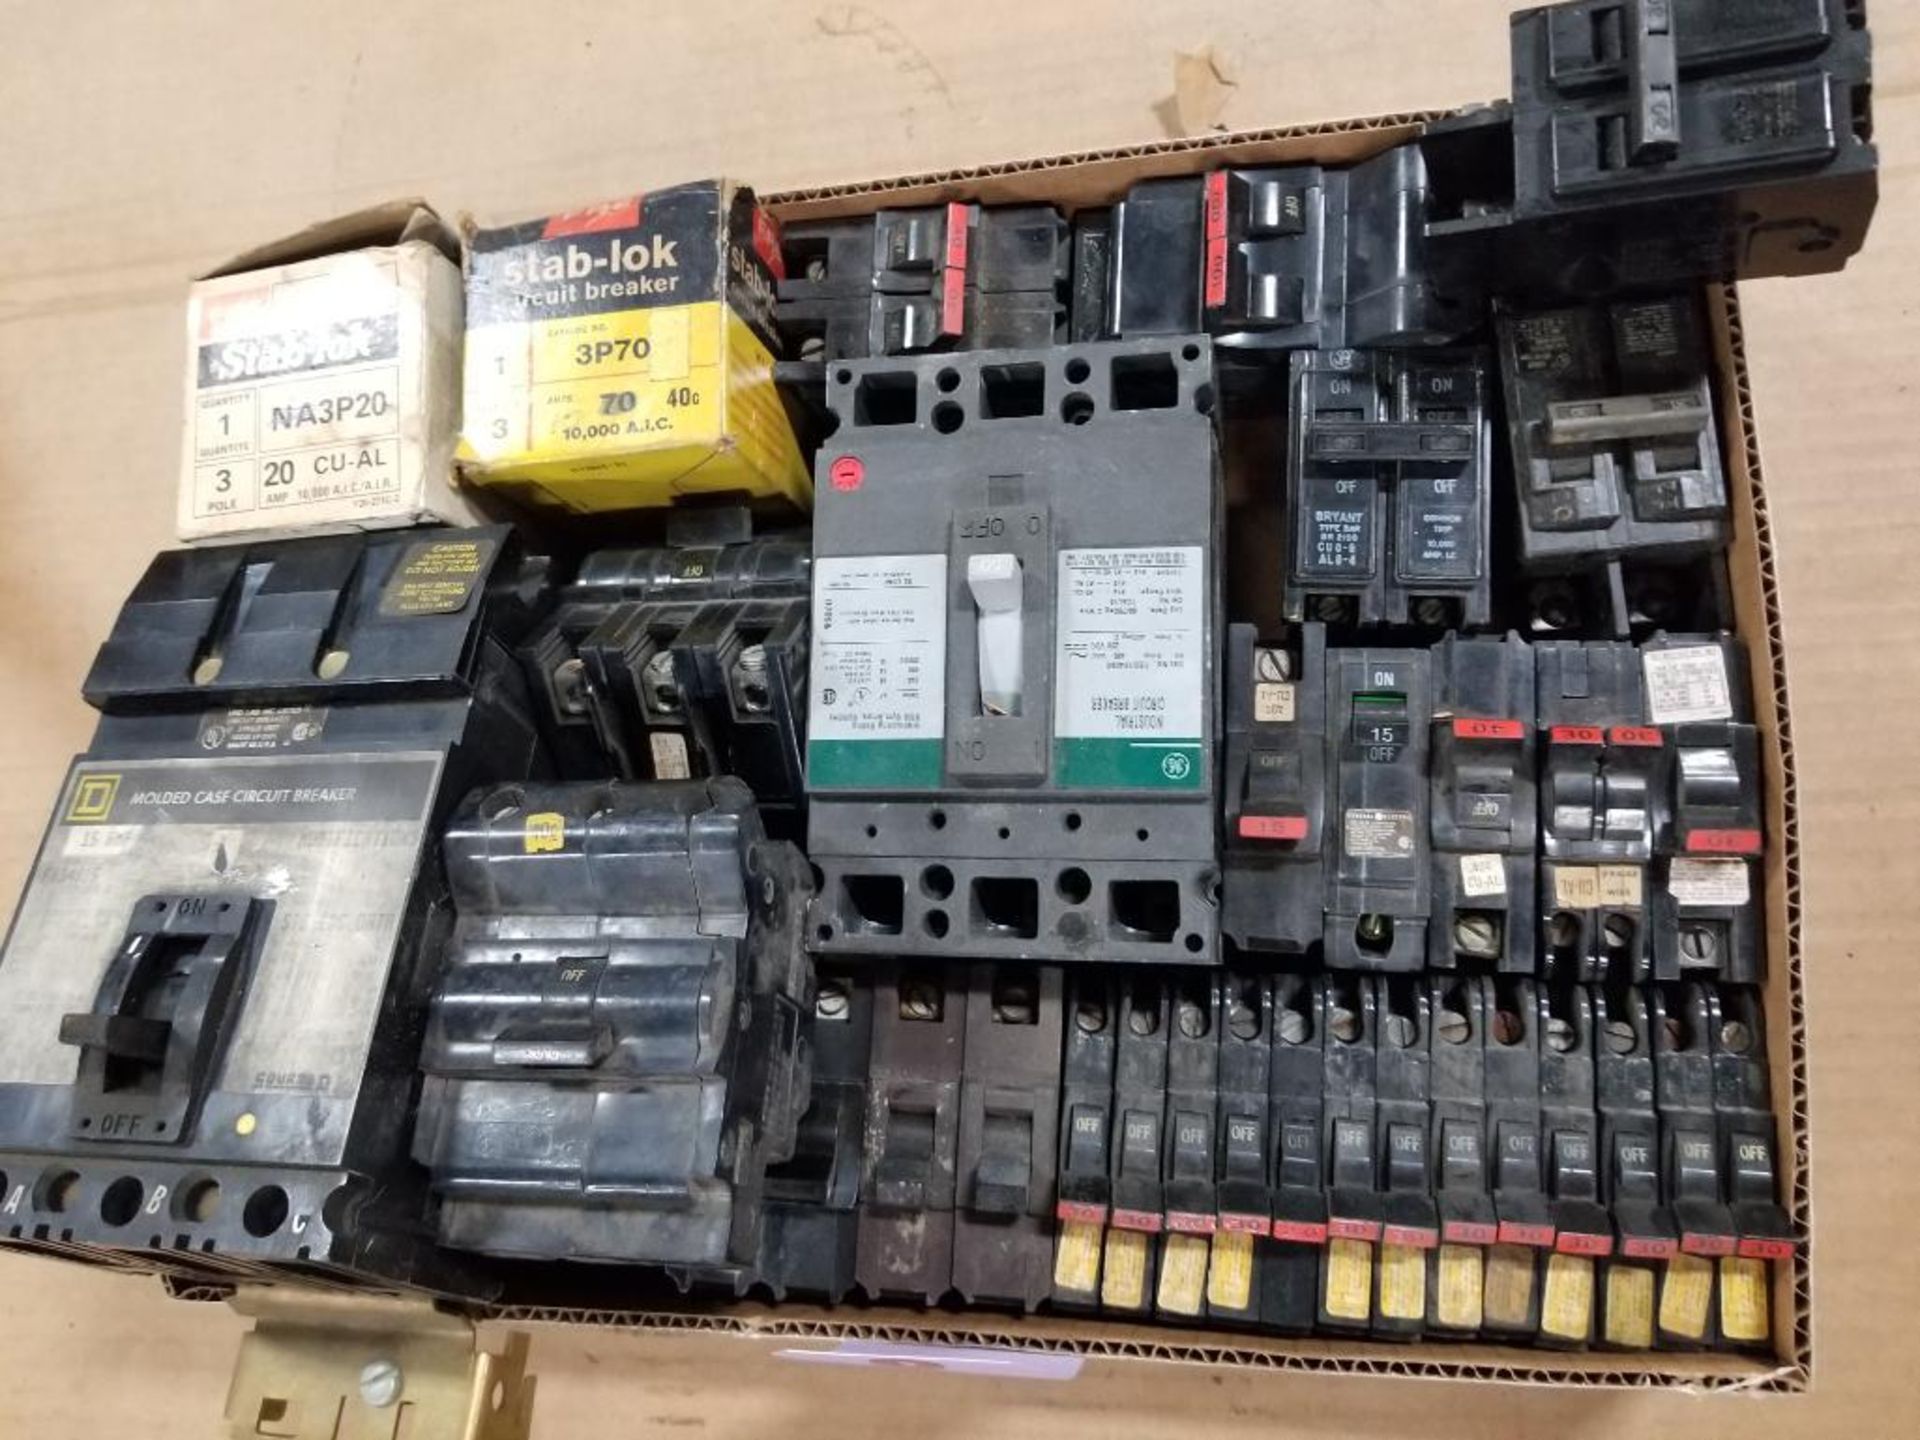 Assorted electrical breakers. Square-D, GE, Stab-lok. - Image 11 of 12